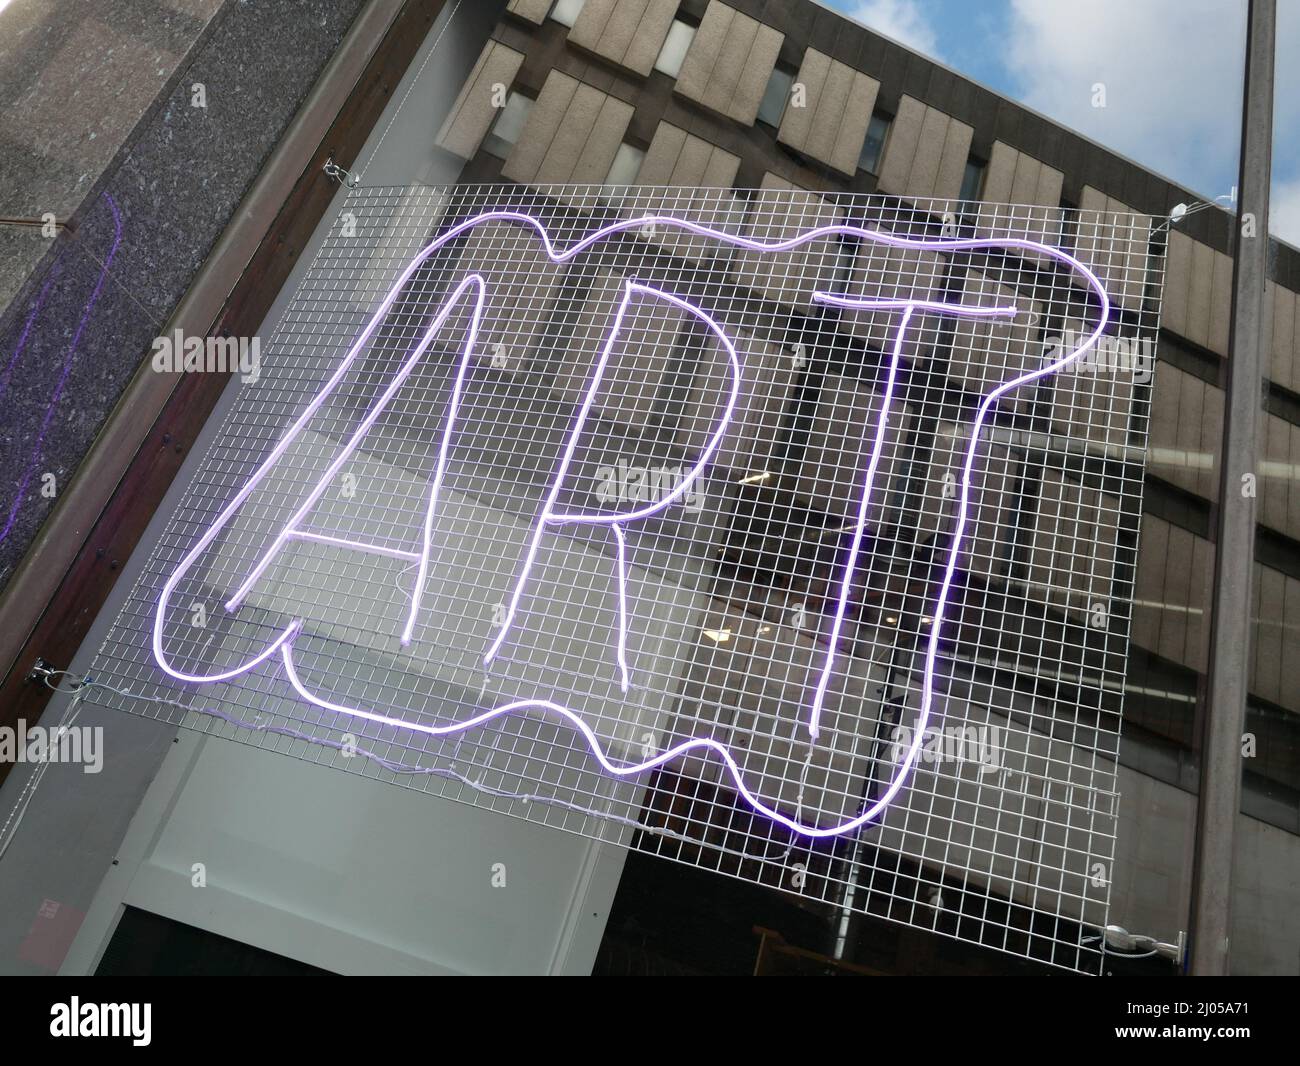 Art neon sign in a window with reflection of surrounding streetscape. Stock Photo